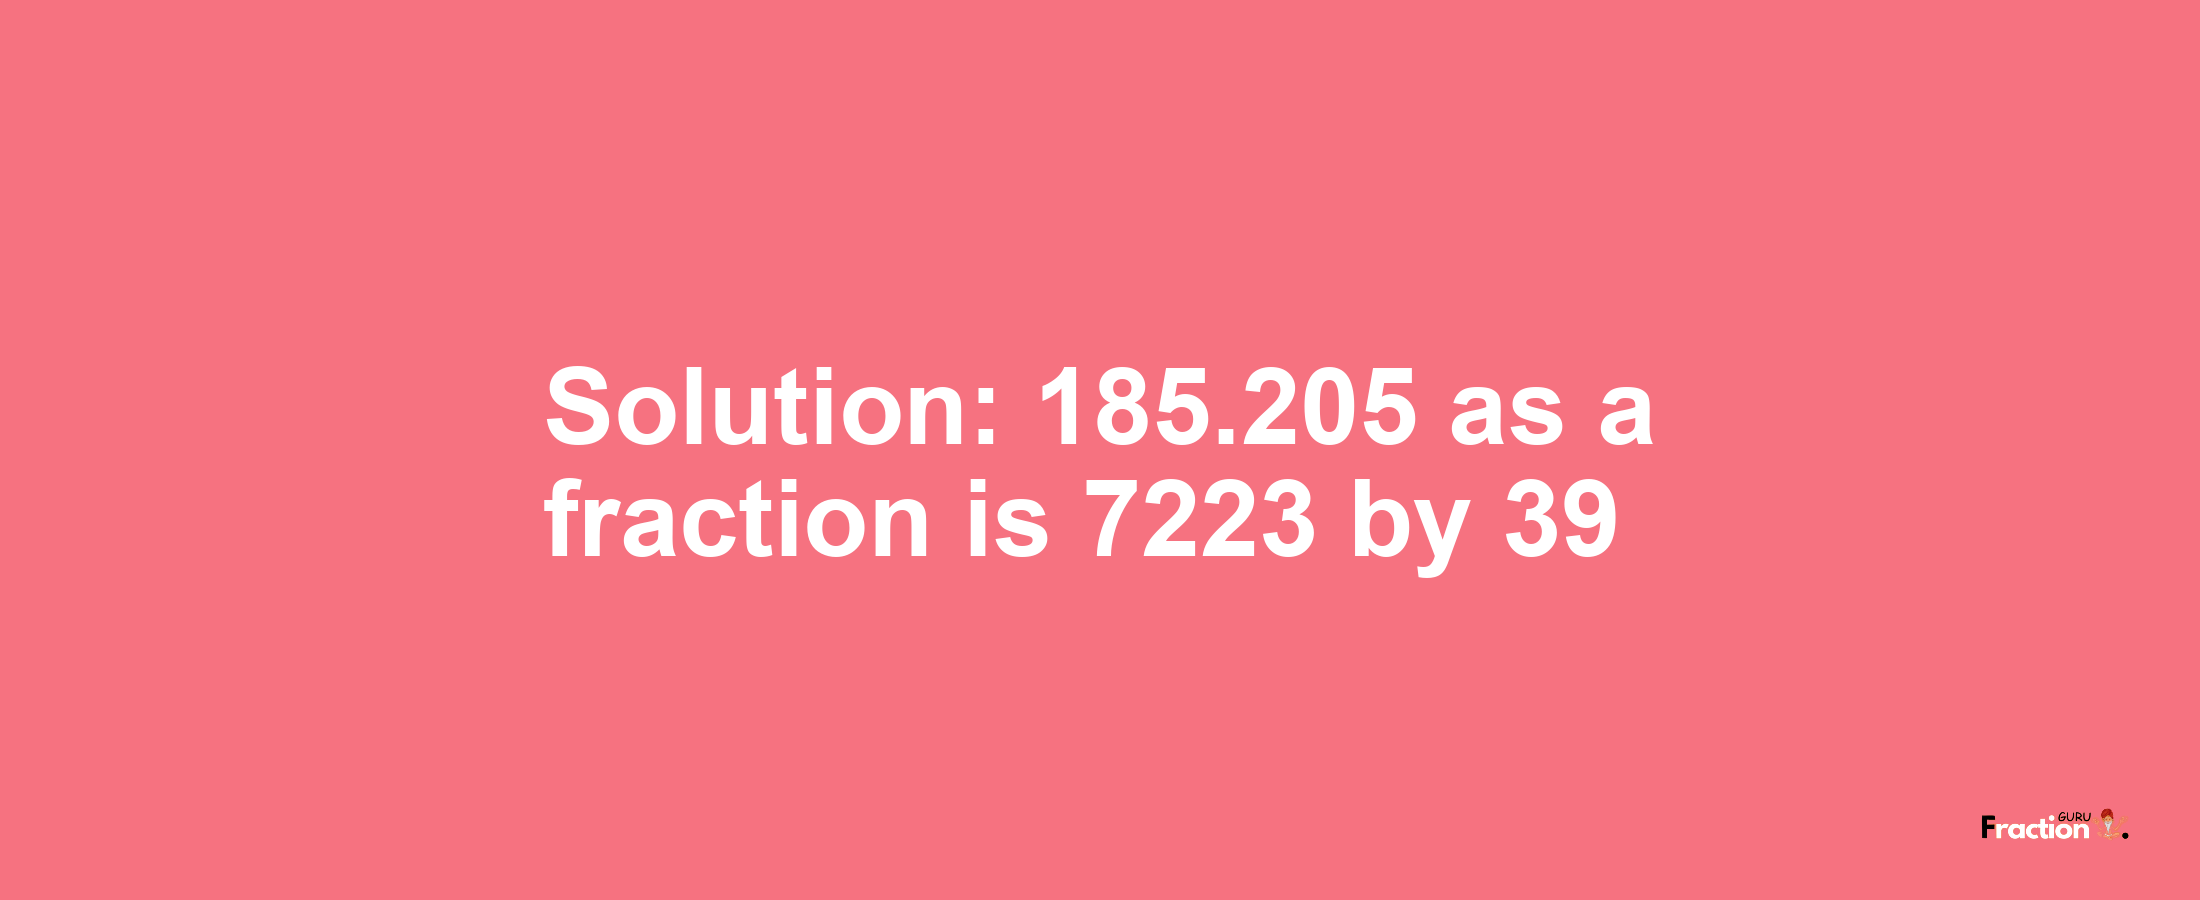 Solution:185.205 as a fraction is 7223/39